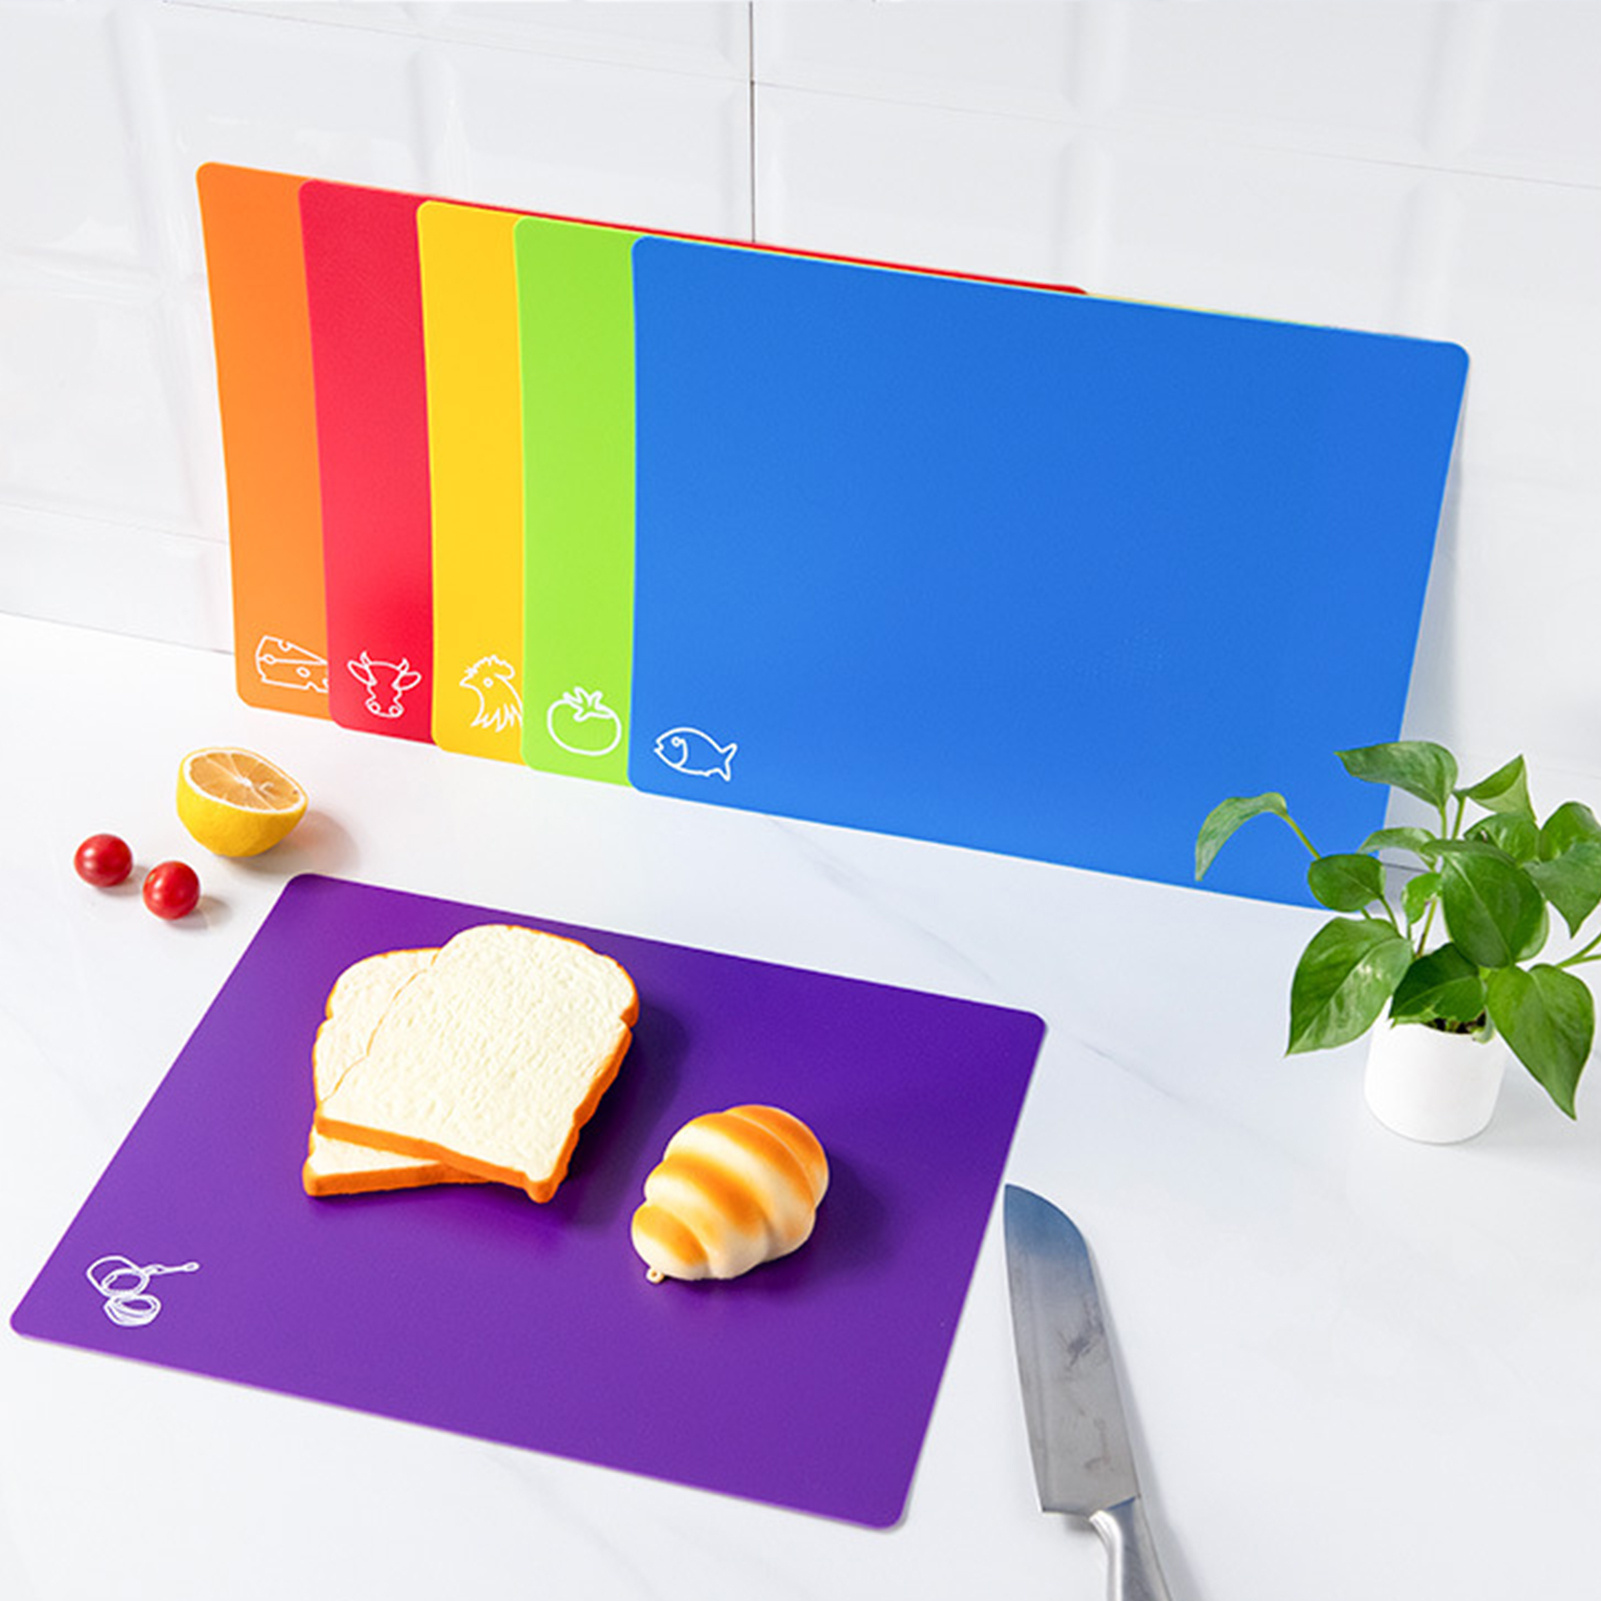 Extra Thick Flexible Cutting Boards for Kitchen - Cutting Mats for